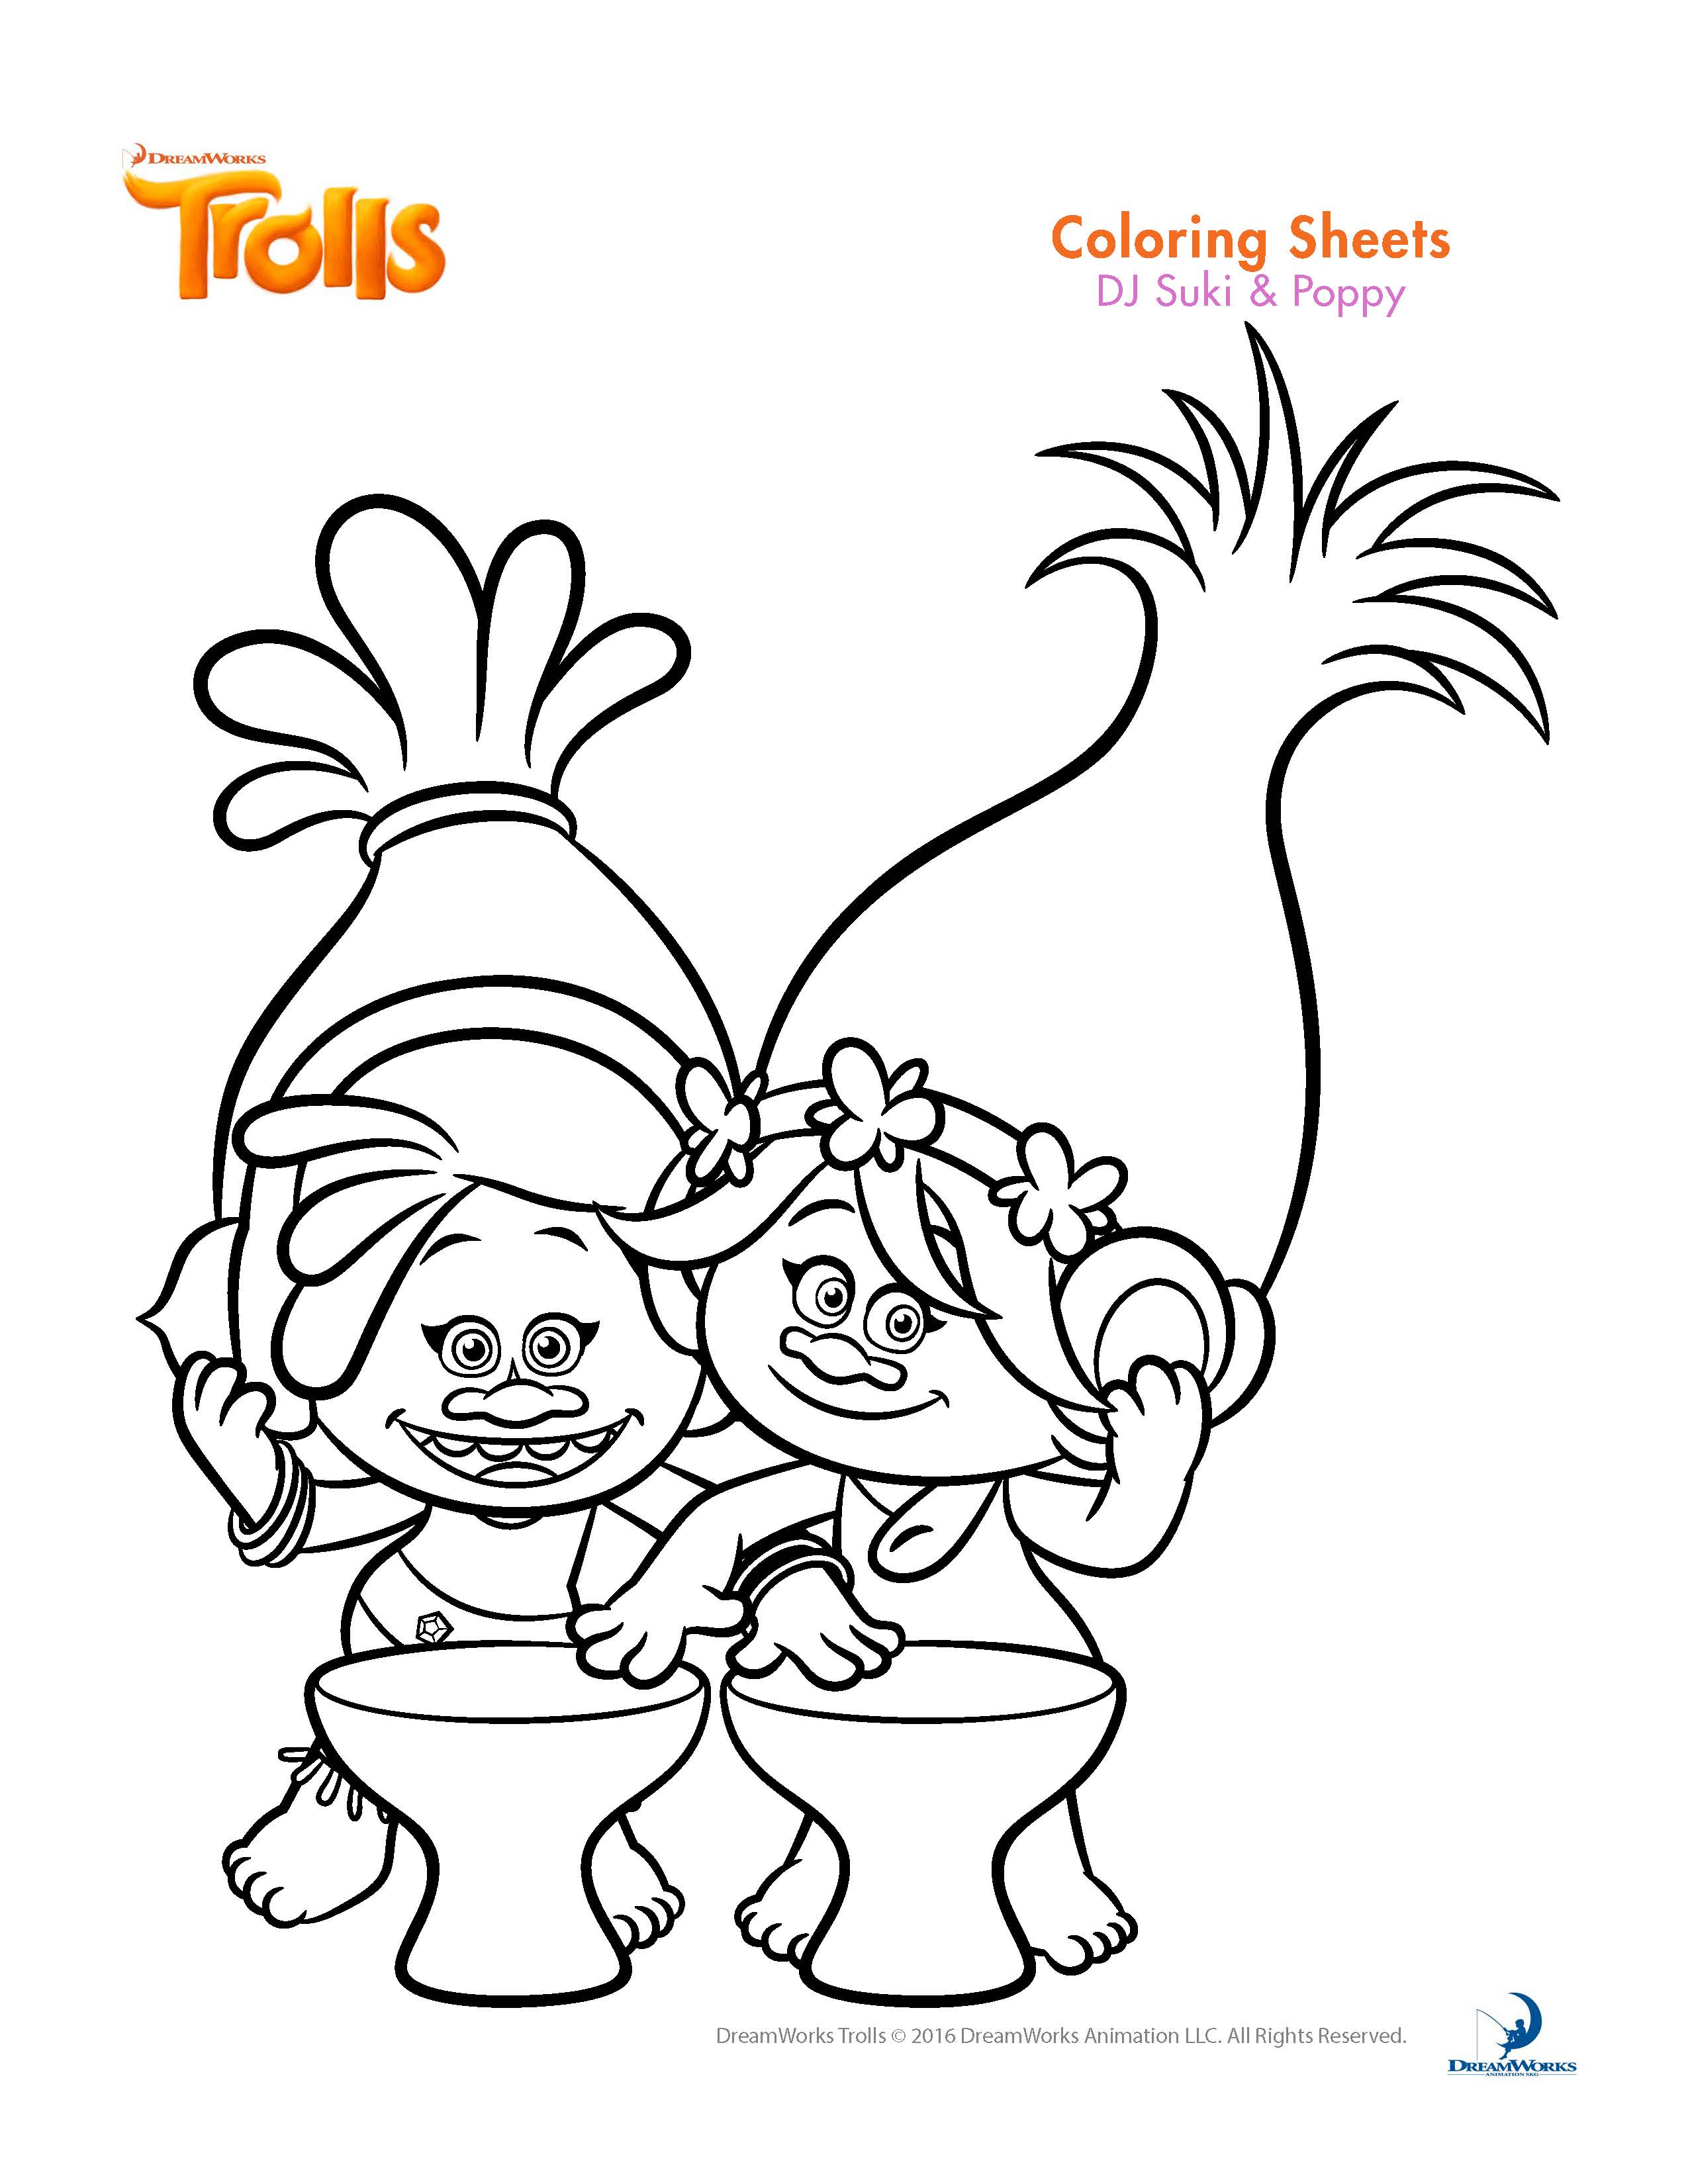 Trolls-free-to-color-for-kids - Trolls Kids Coloring Pages